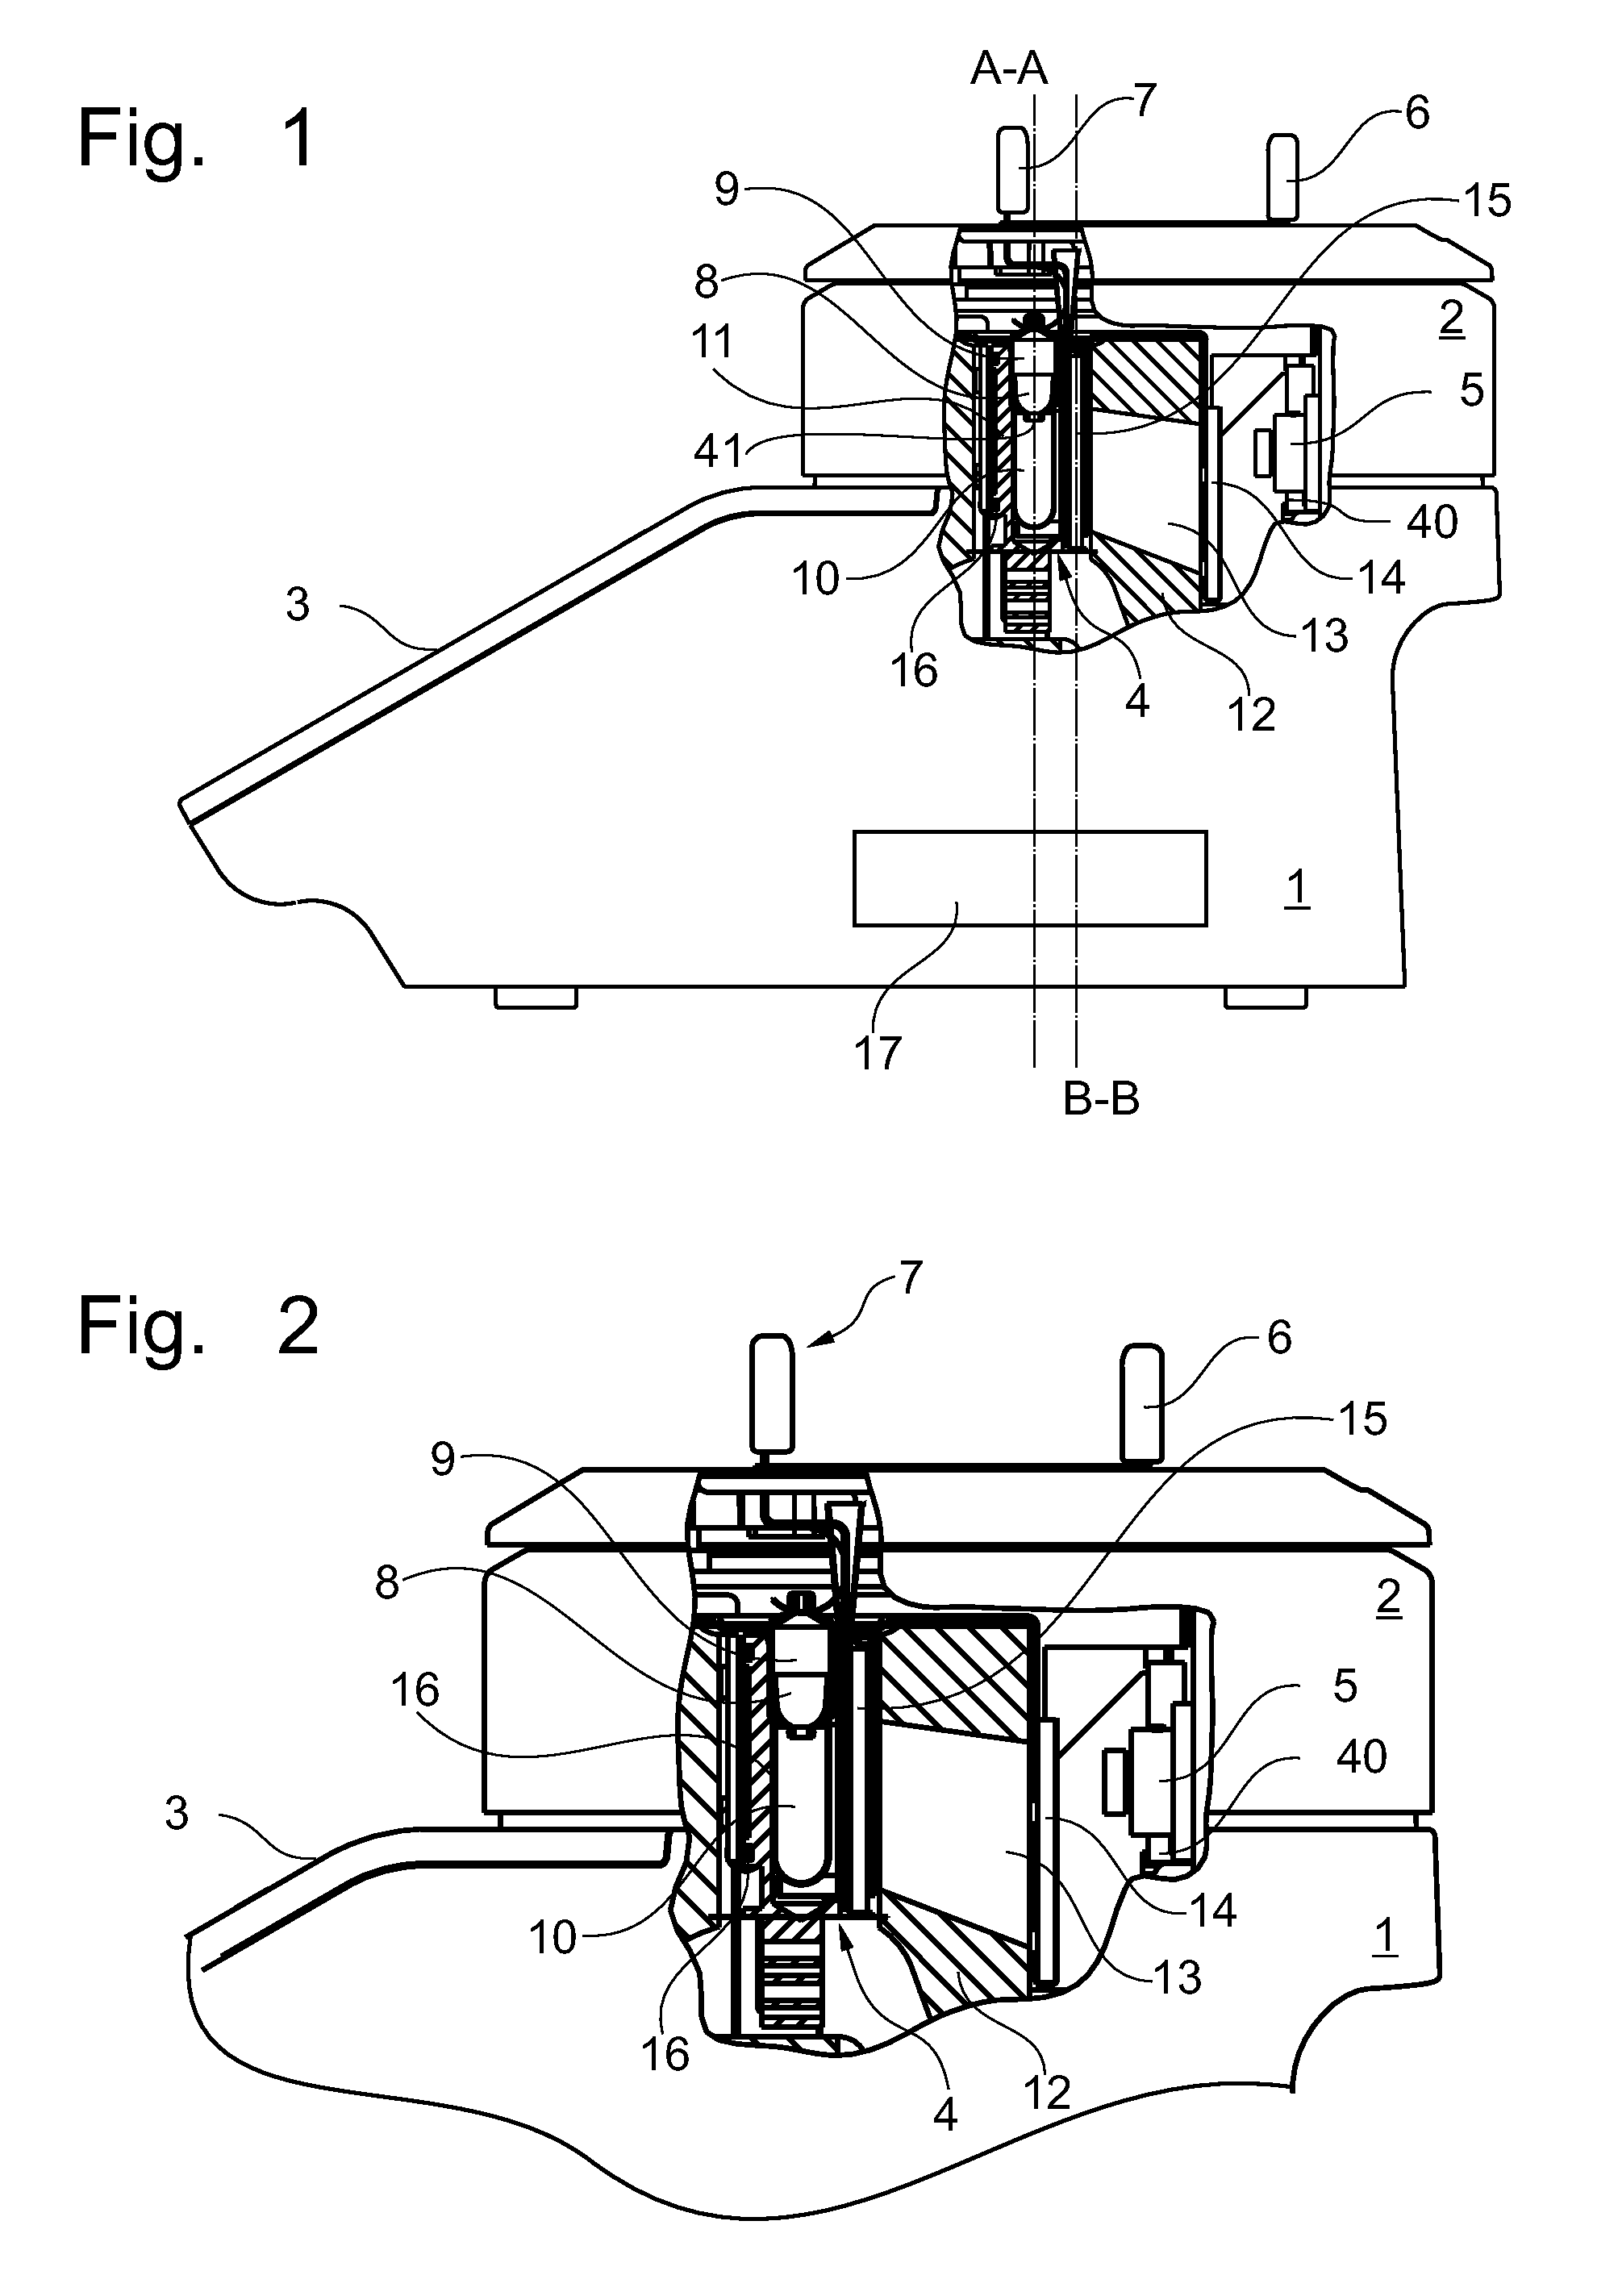 Method of determining the softening- or dropping point